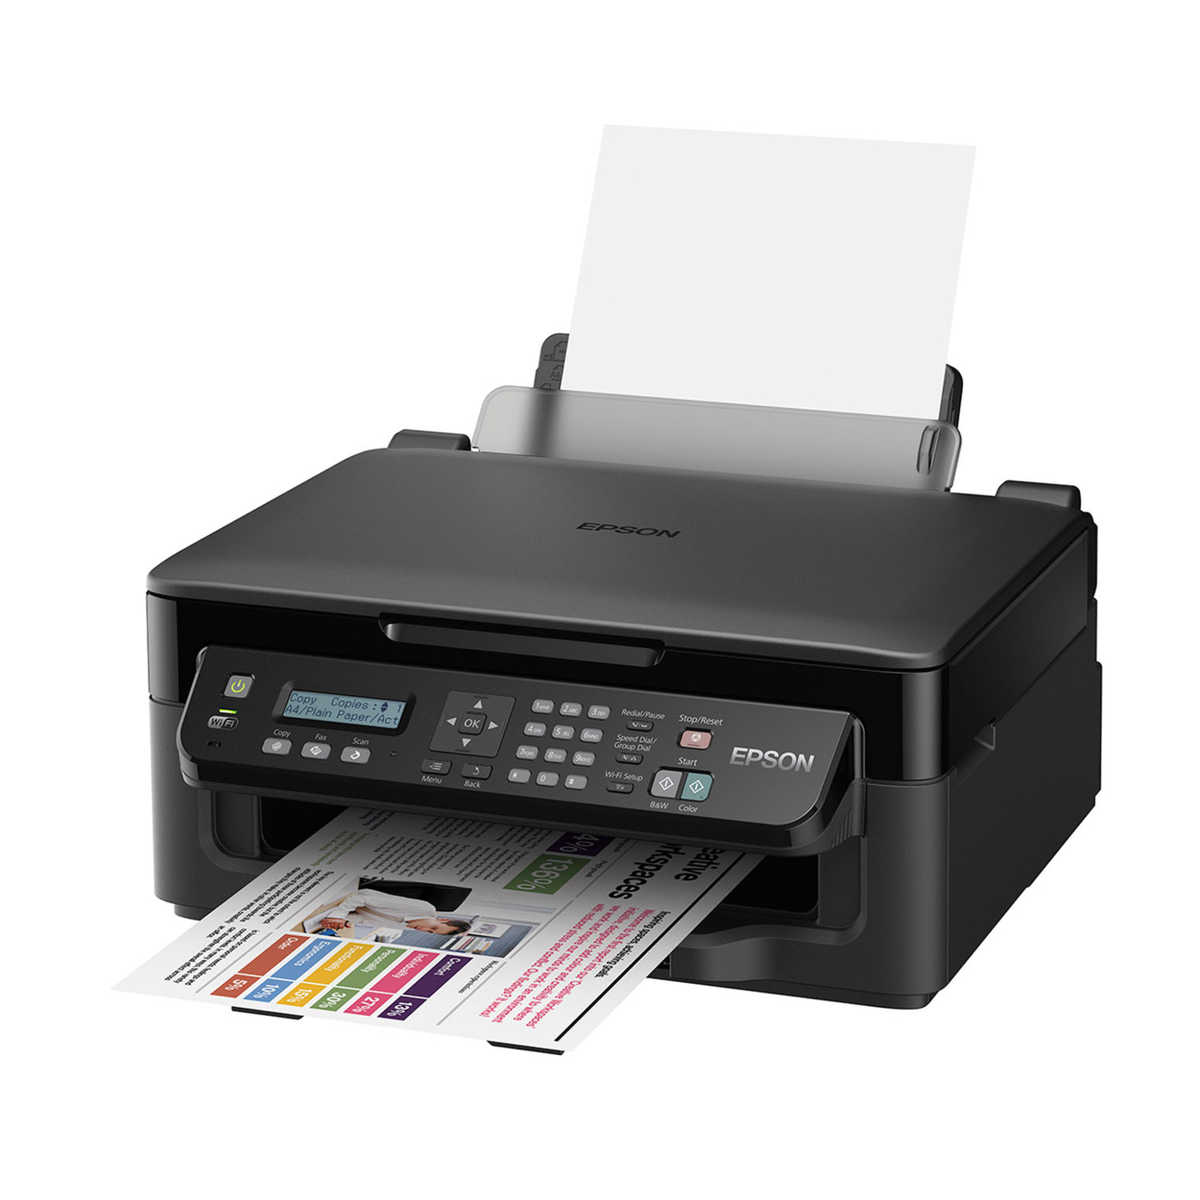 Epson WorkForce WF-2510 Better Than Most Budget All-in-Ones - Inkjet Wholesale Blog